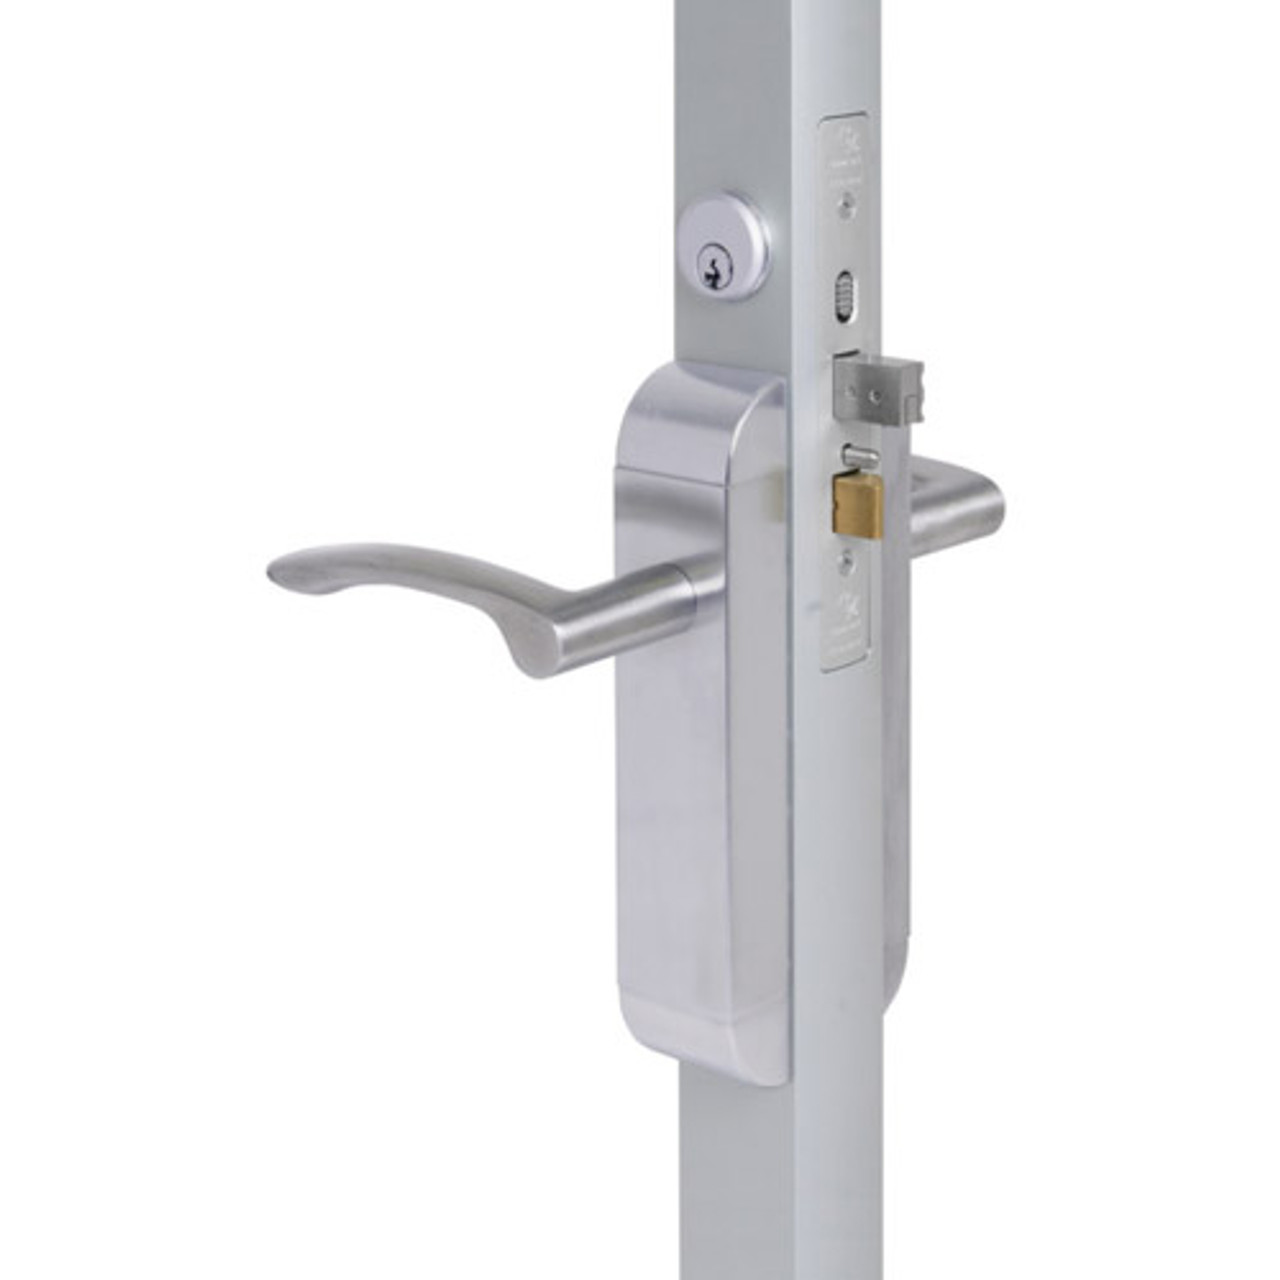 2190-441-302-32 Adams Rite Dual Force Interconnected 2190 series Deadlock/Deadlatch in Bright Stainless